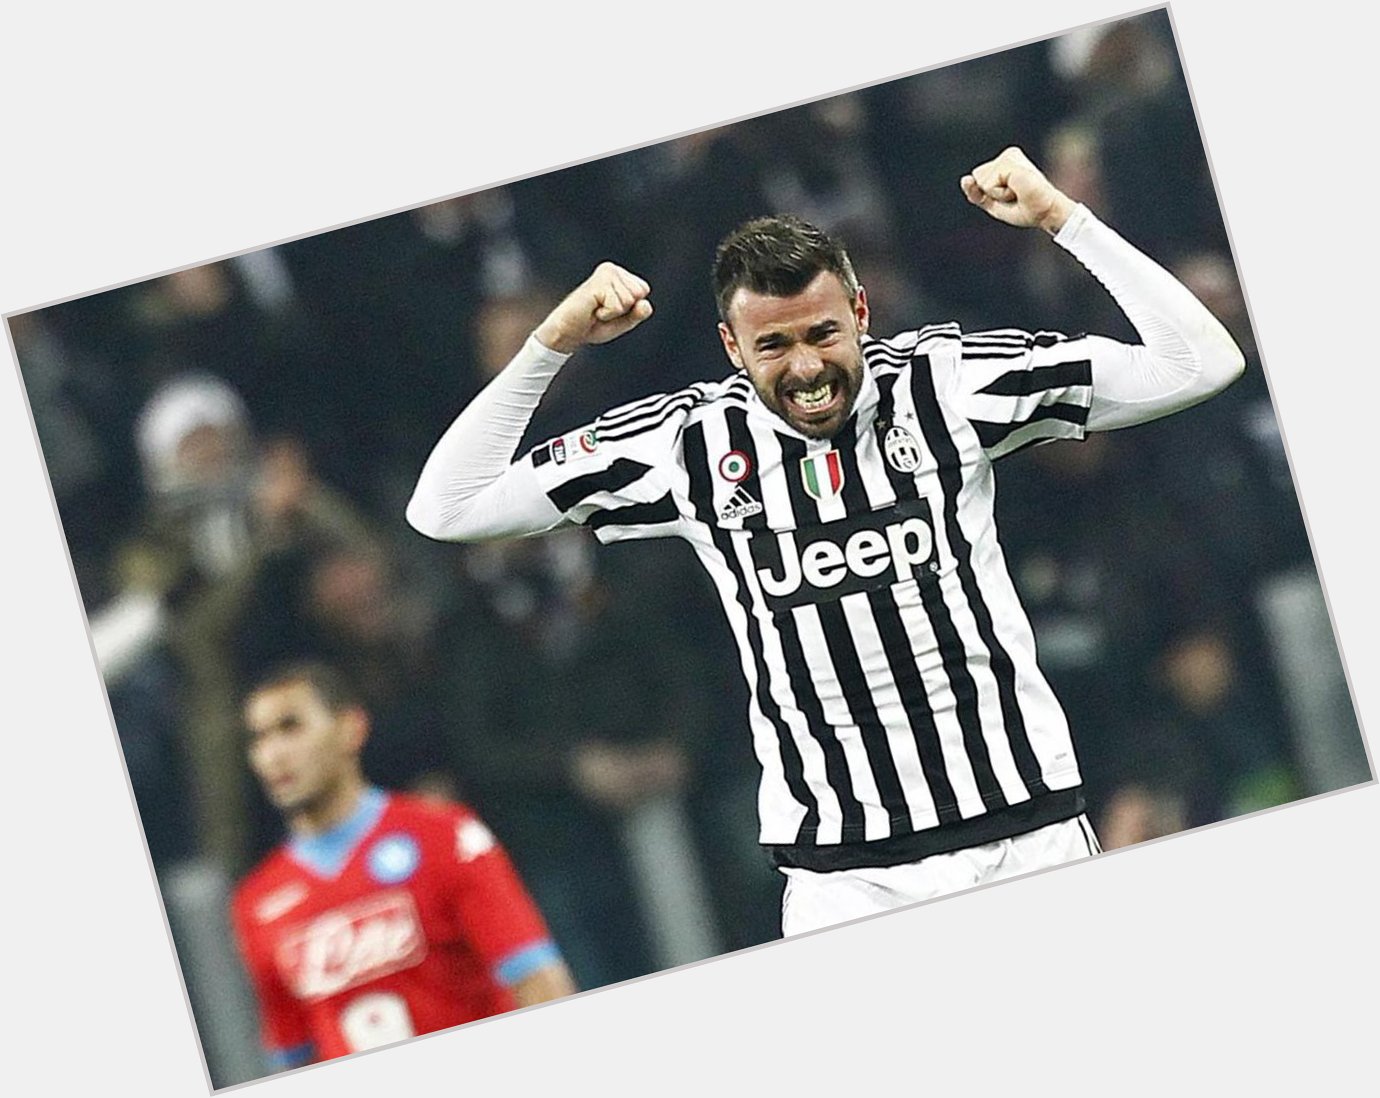 Happy birthday to Juventus legend Andrea Barzagli, who turns 37 today. 

Games: 268
Goals: 2 : 12 